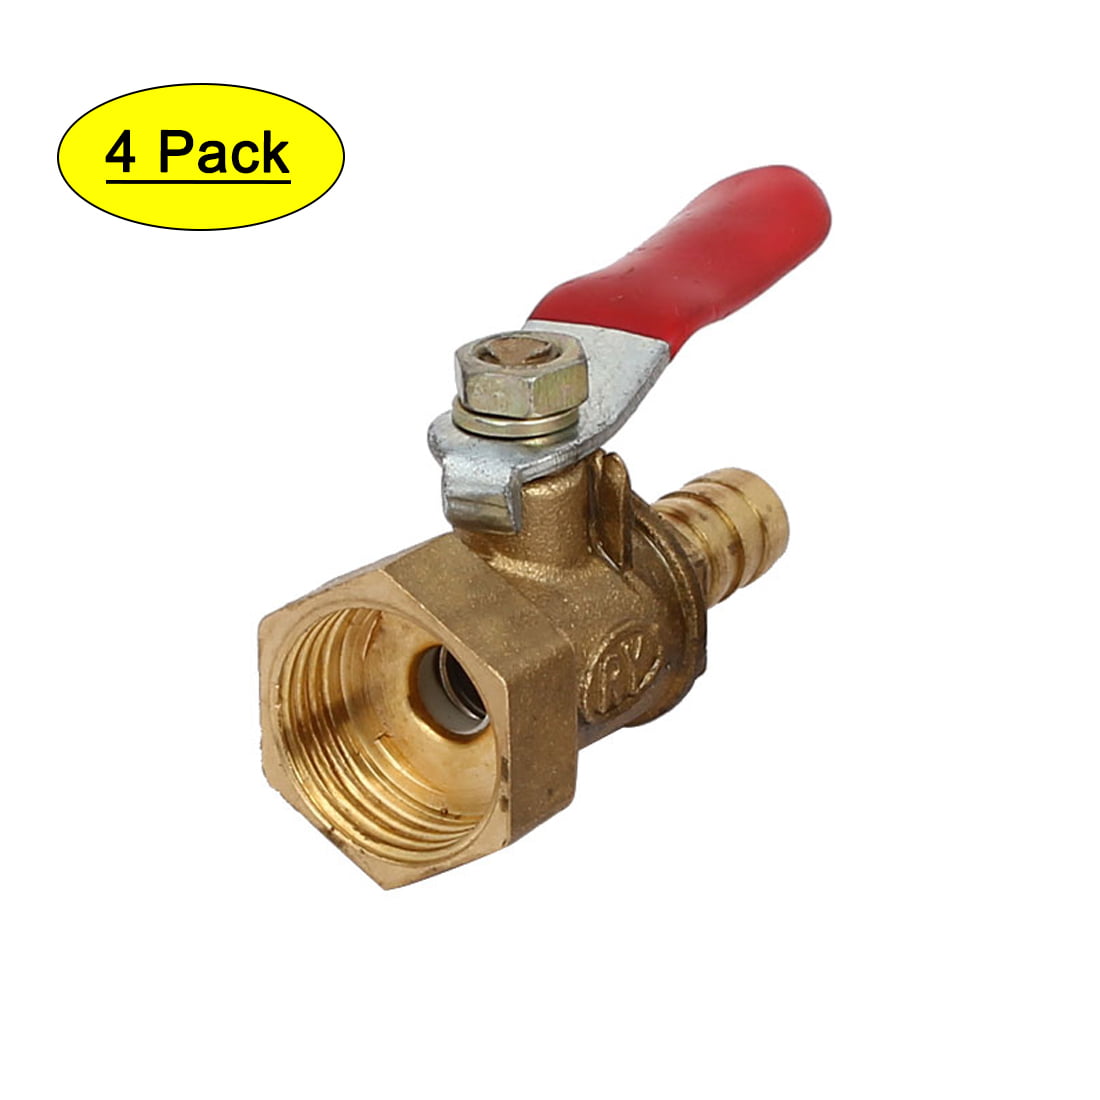 1/2" BSP Male to 8mm Hose Barb Brass Ball Valve Pipe Fitting Red Lever Handle 